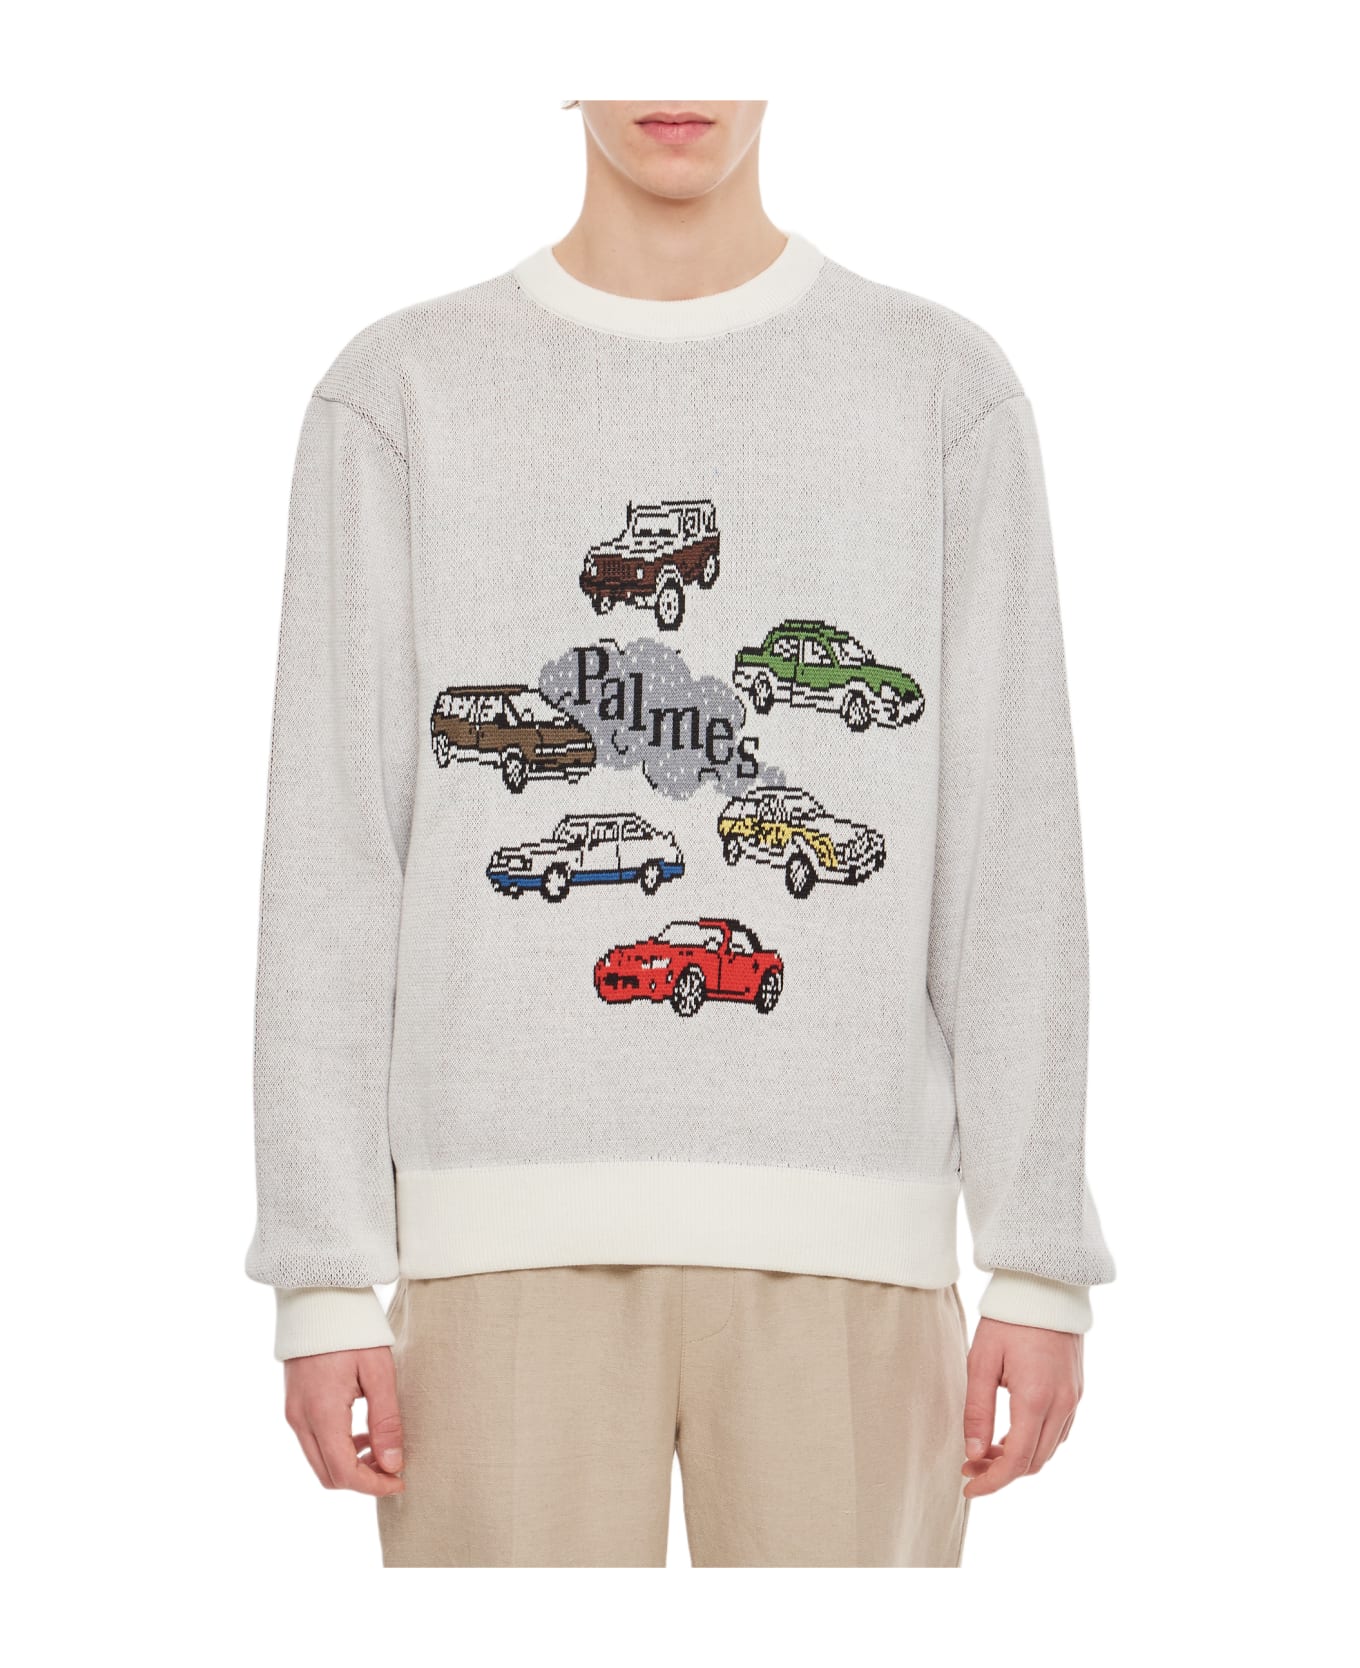 Palmes Cars Knitted Sweater - White